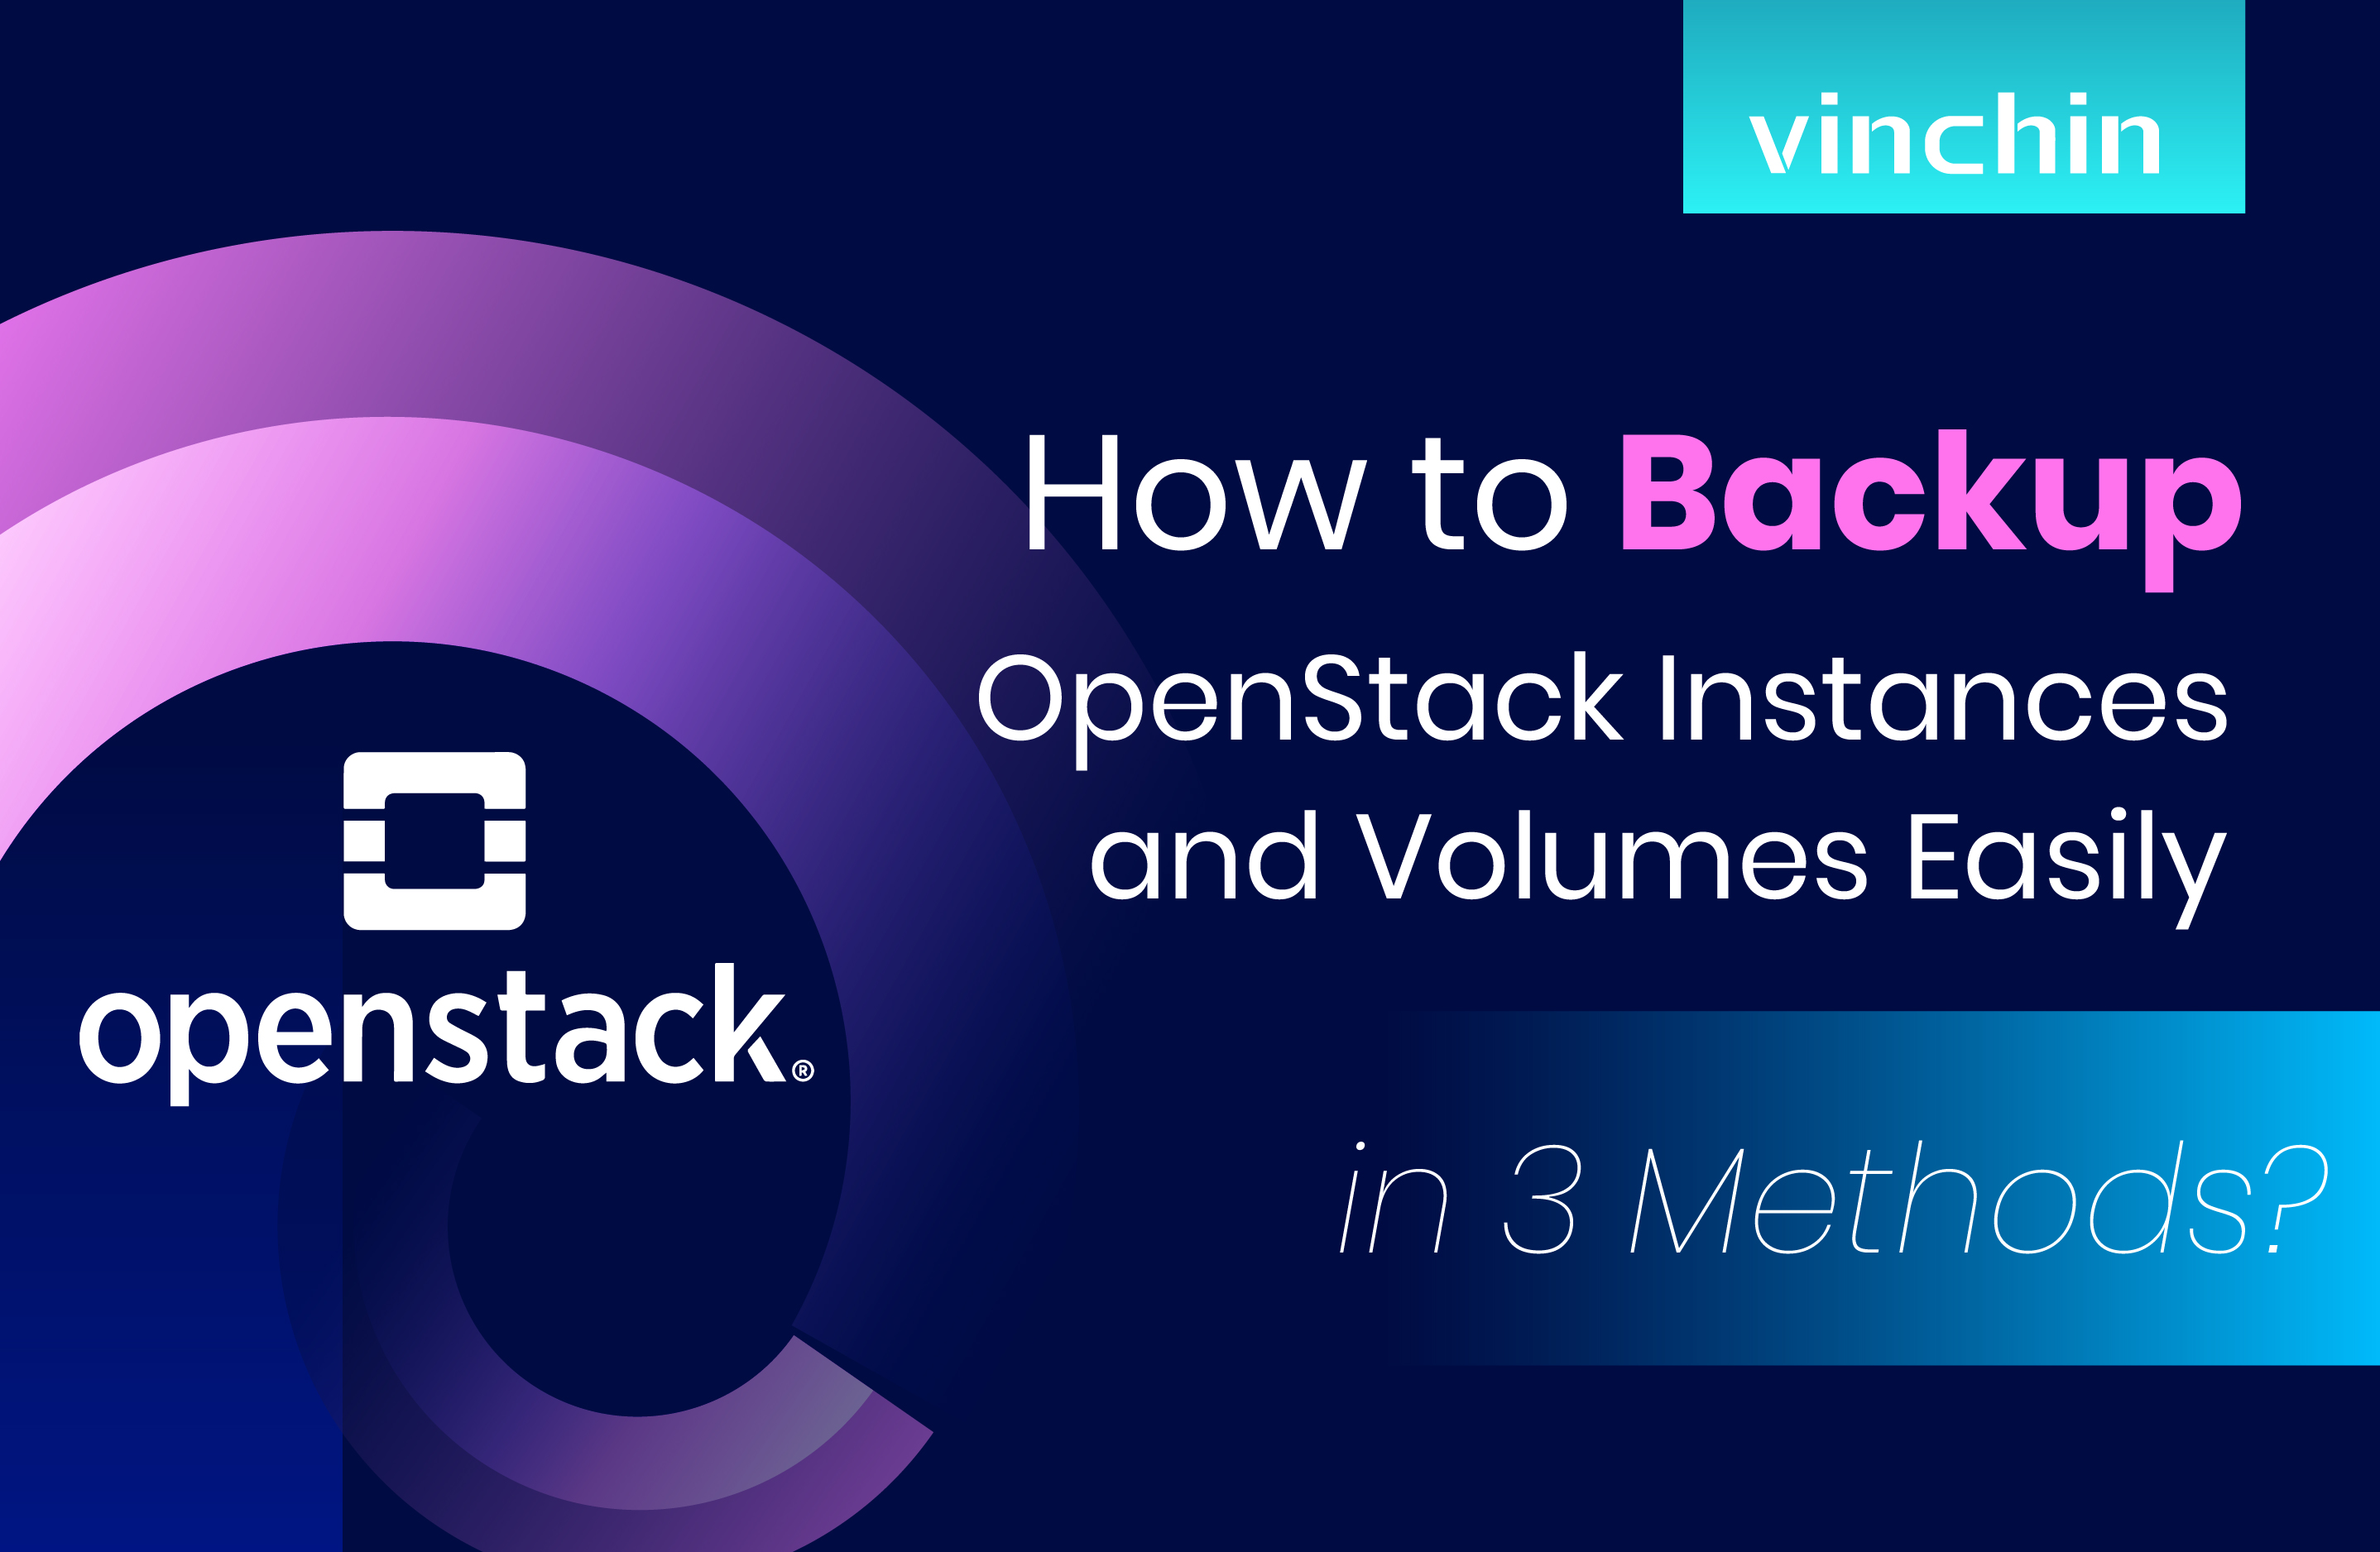 How to Backup OpenStack Instances and Volumes Easily in 3 Methods?